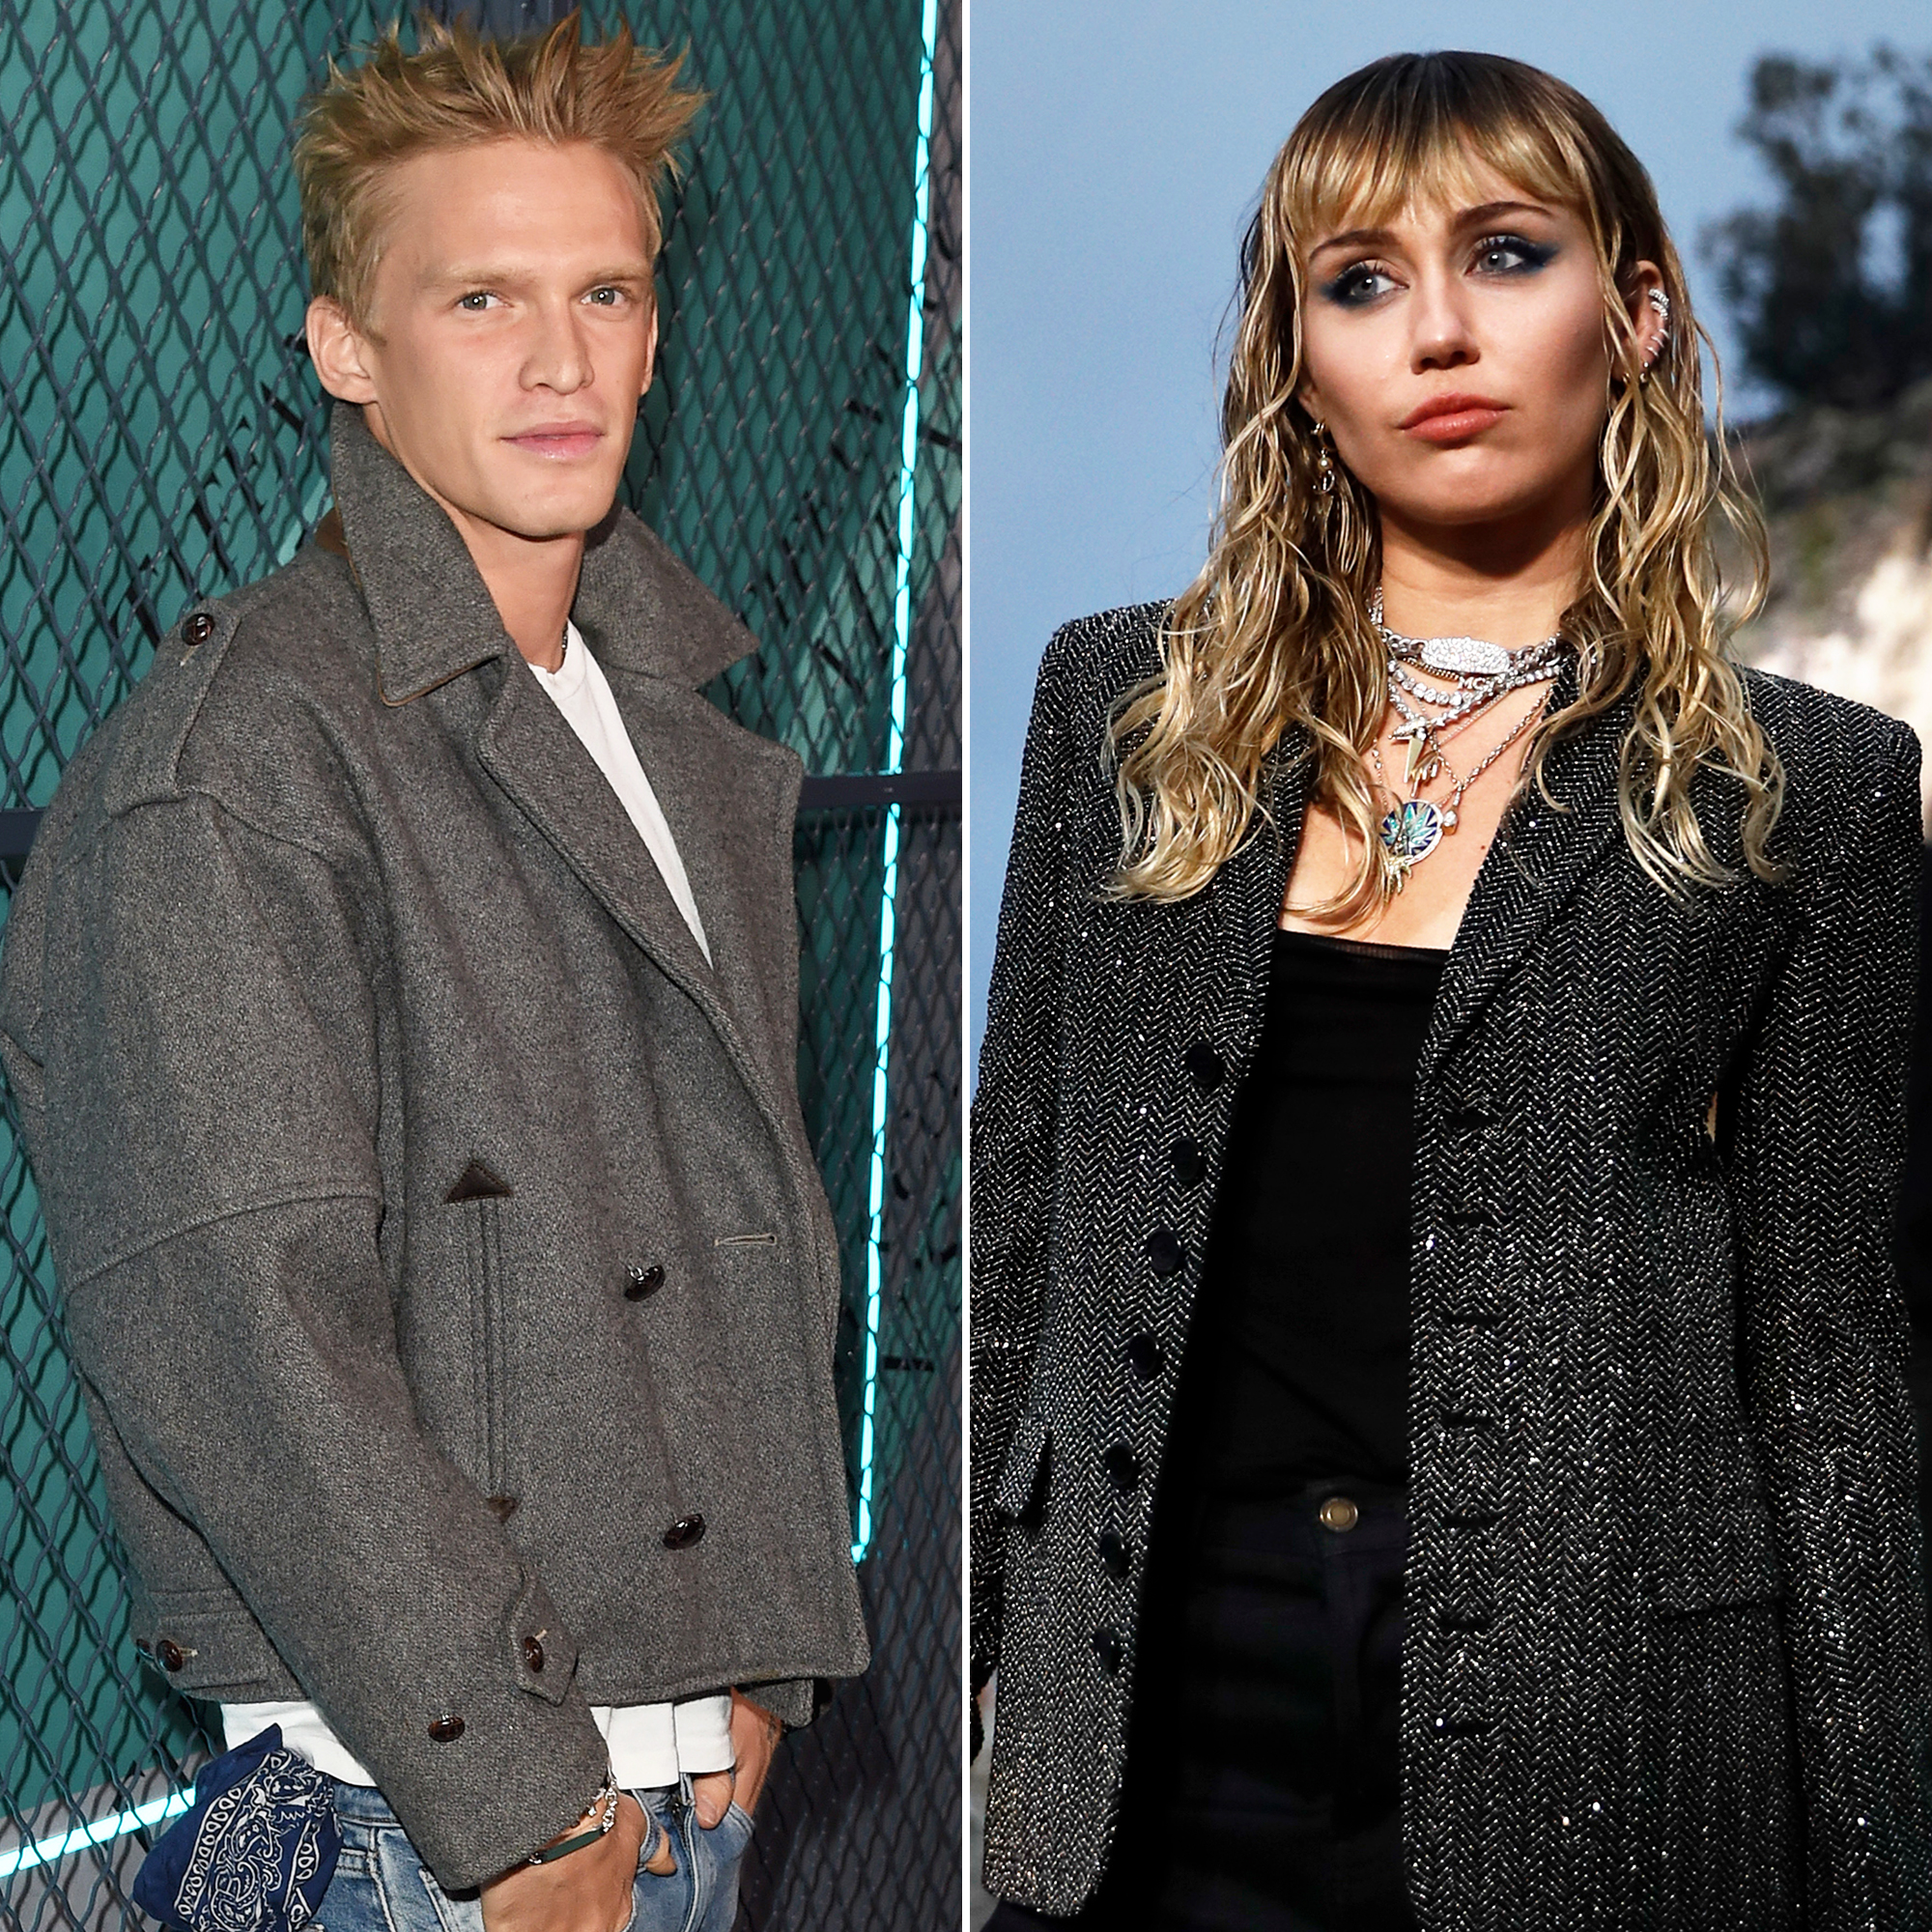 Does Cody Simpson Want to Marry Miley Cyrus? See the Cryptic Post